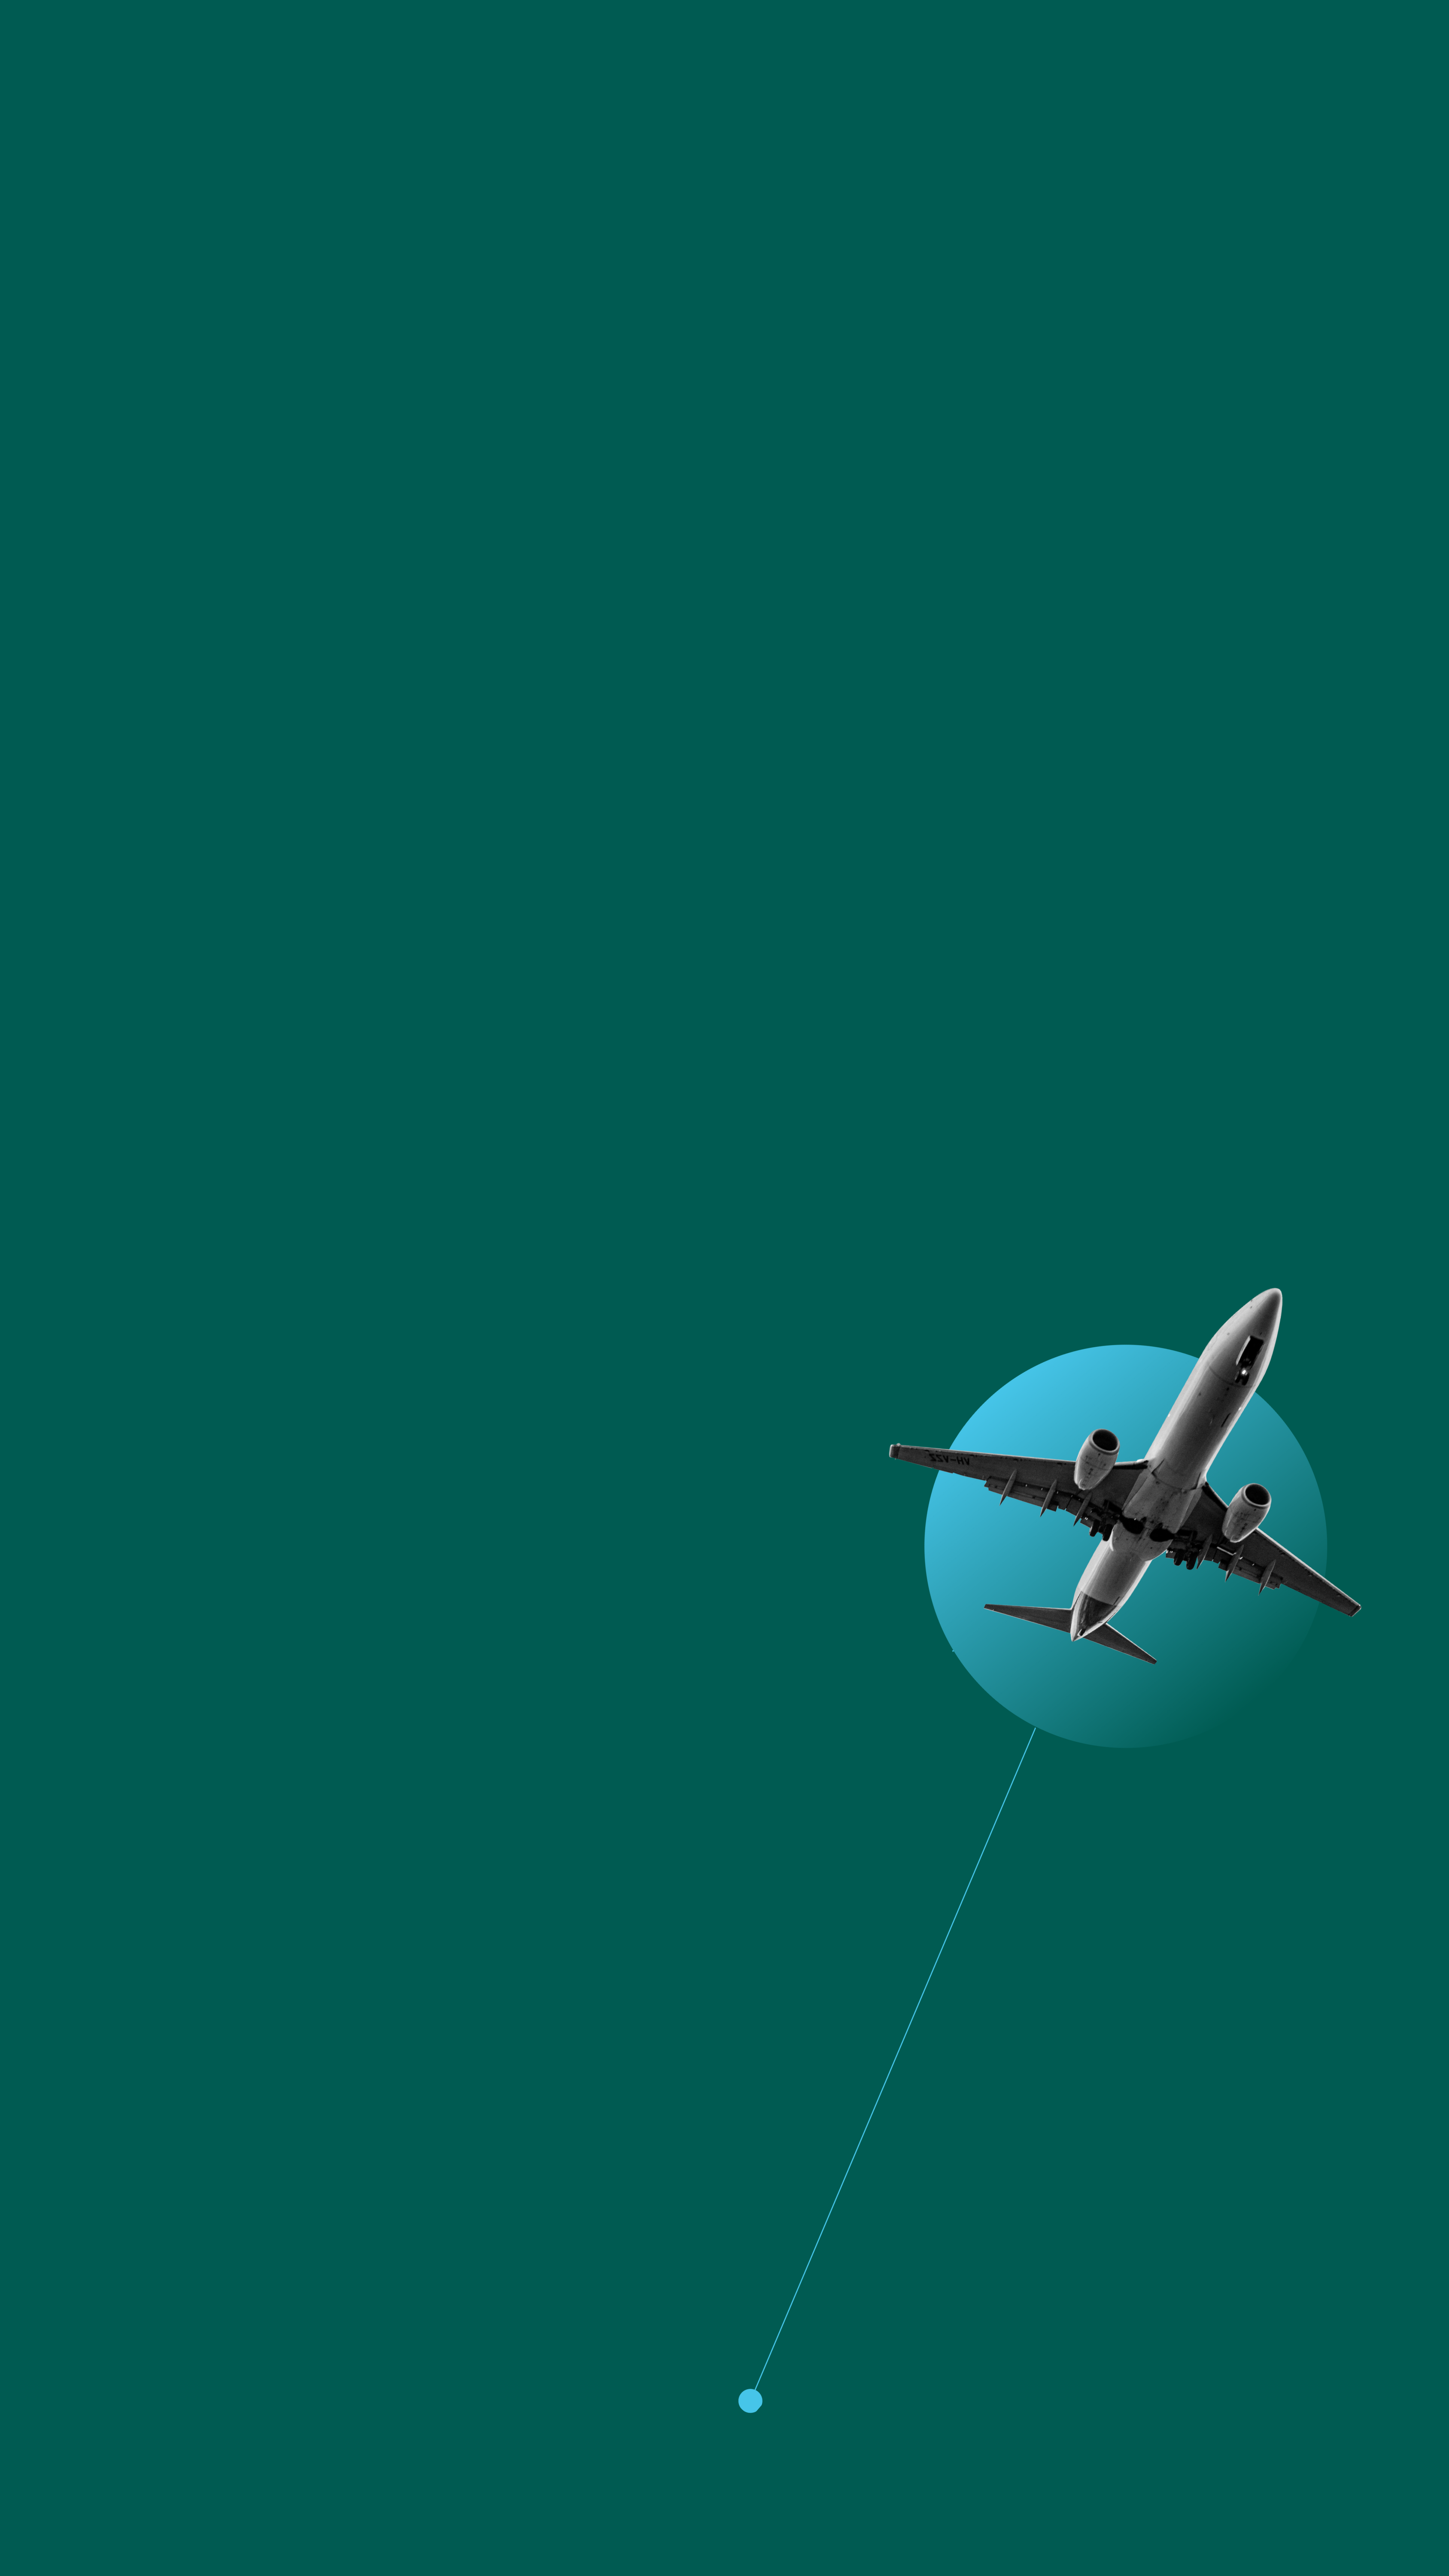 100+] Airplane Android Wallpapers | Wallpapers.com